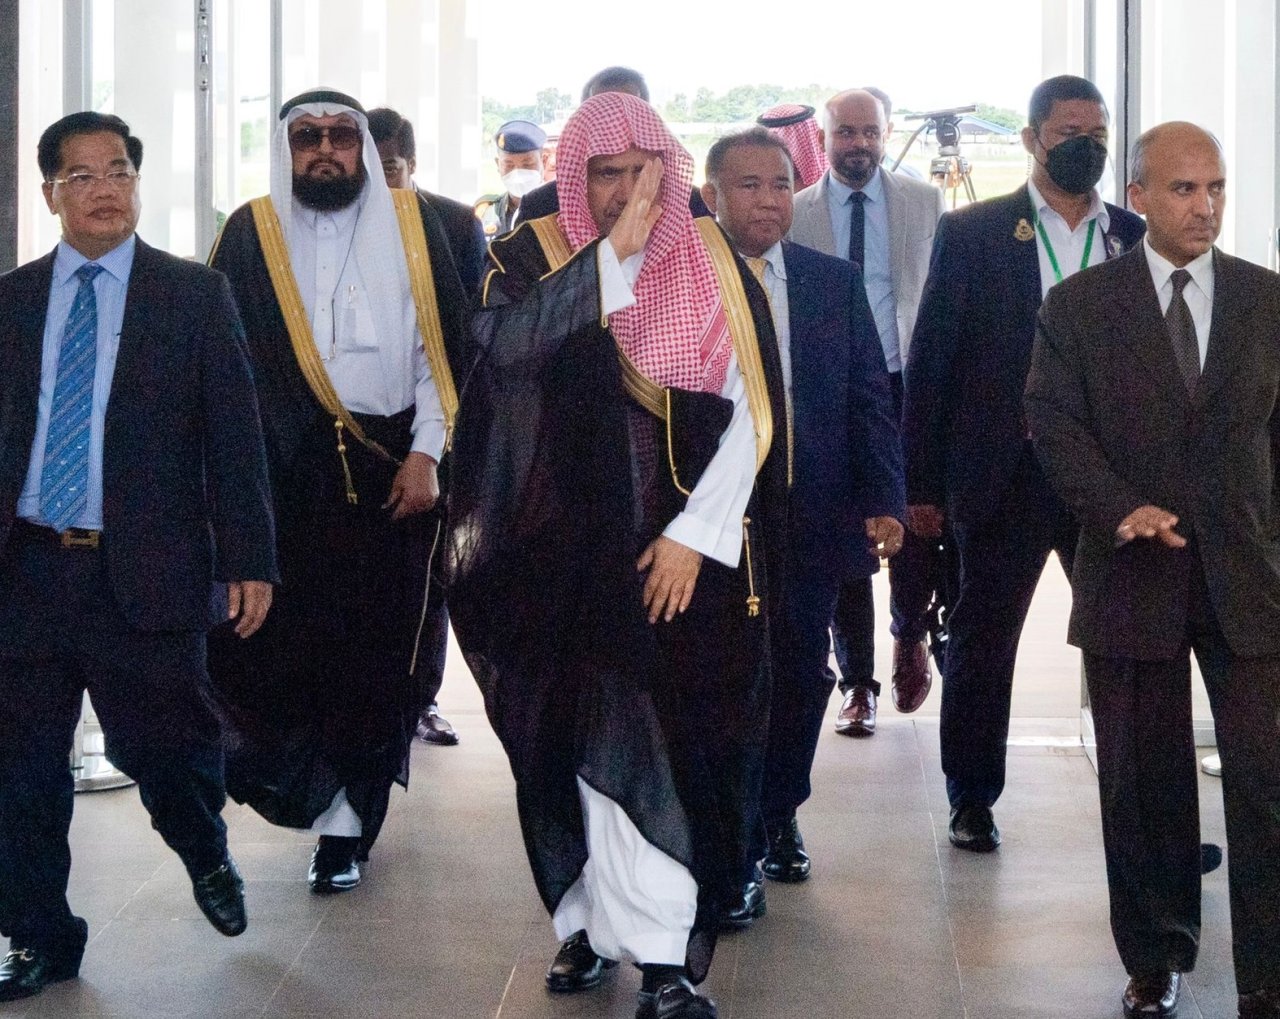 Dr. Mohammad Alissa arrived at Phnom Penh International Airport at the official invitation of the Kingdom of Cambodia